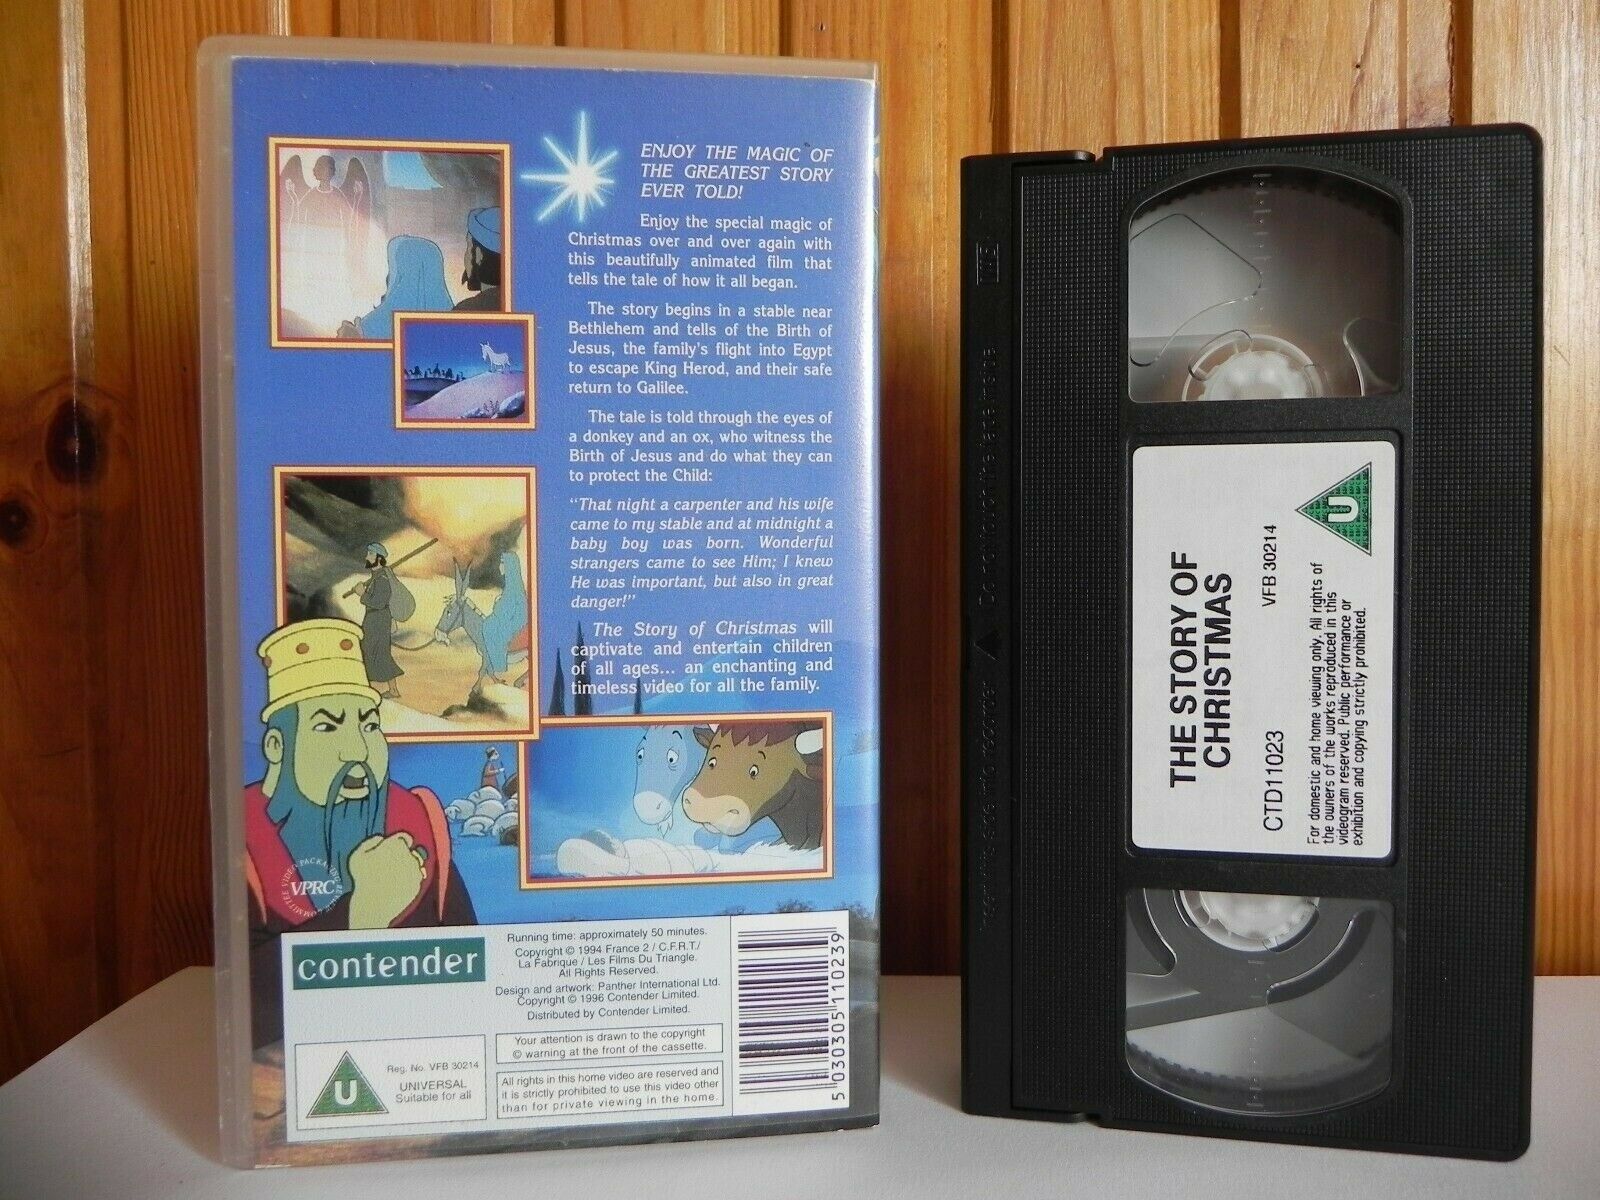 The Story Of Christmas - Animated - Children's Festive Animation - Pal VHS-